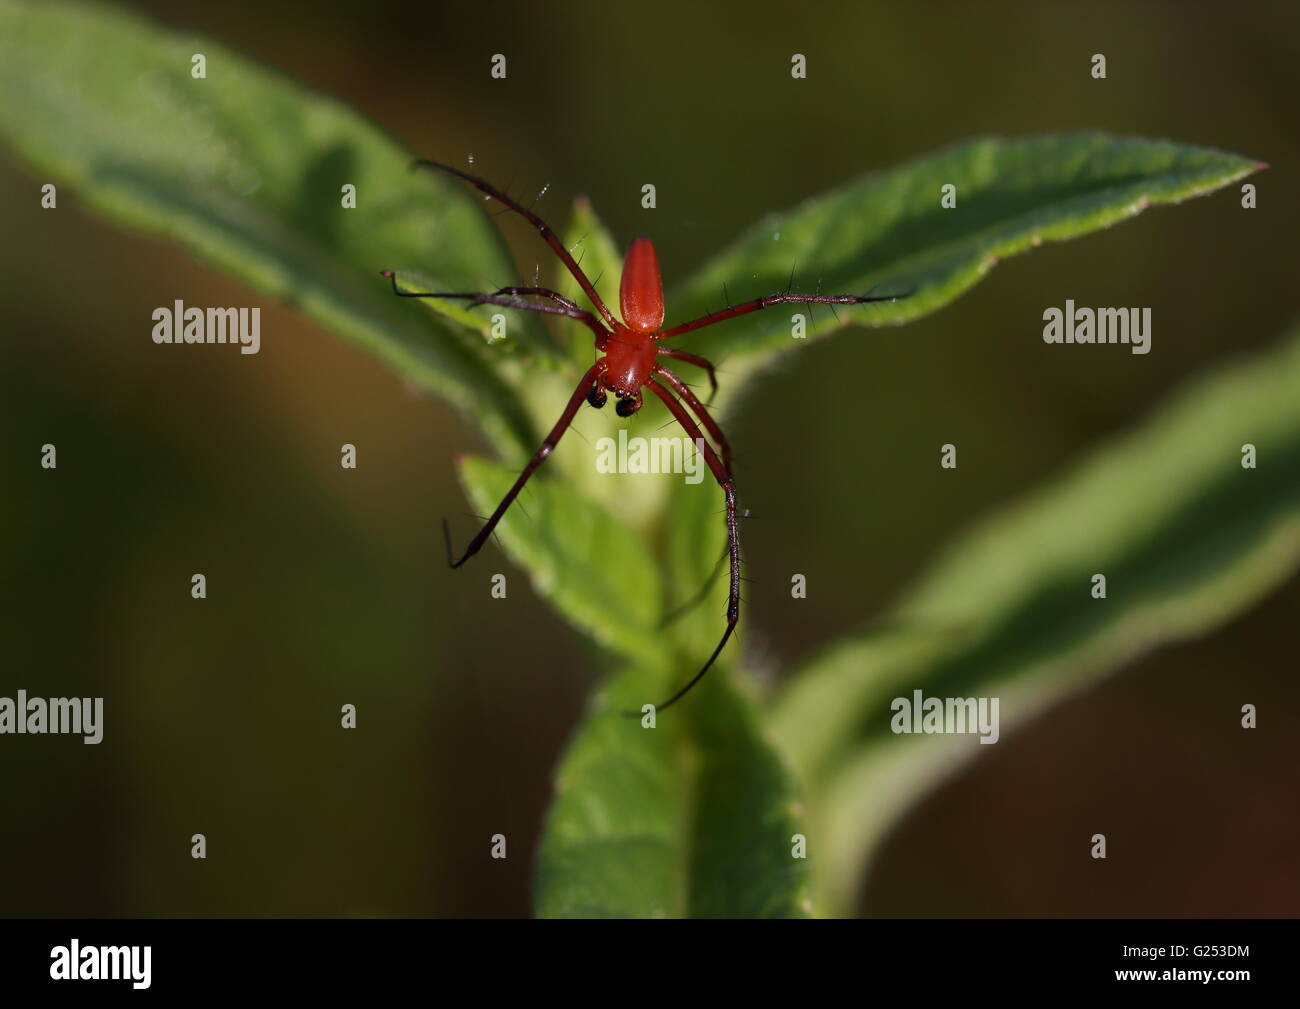 Red male long-legged spider on a leaf Stock Photo